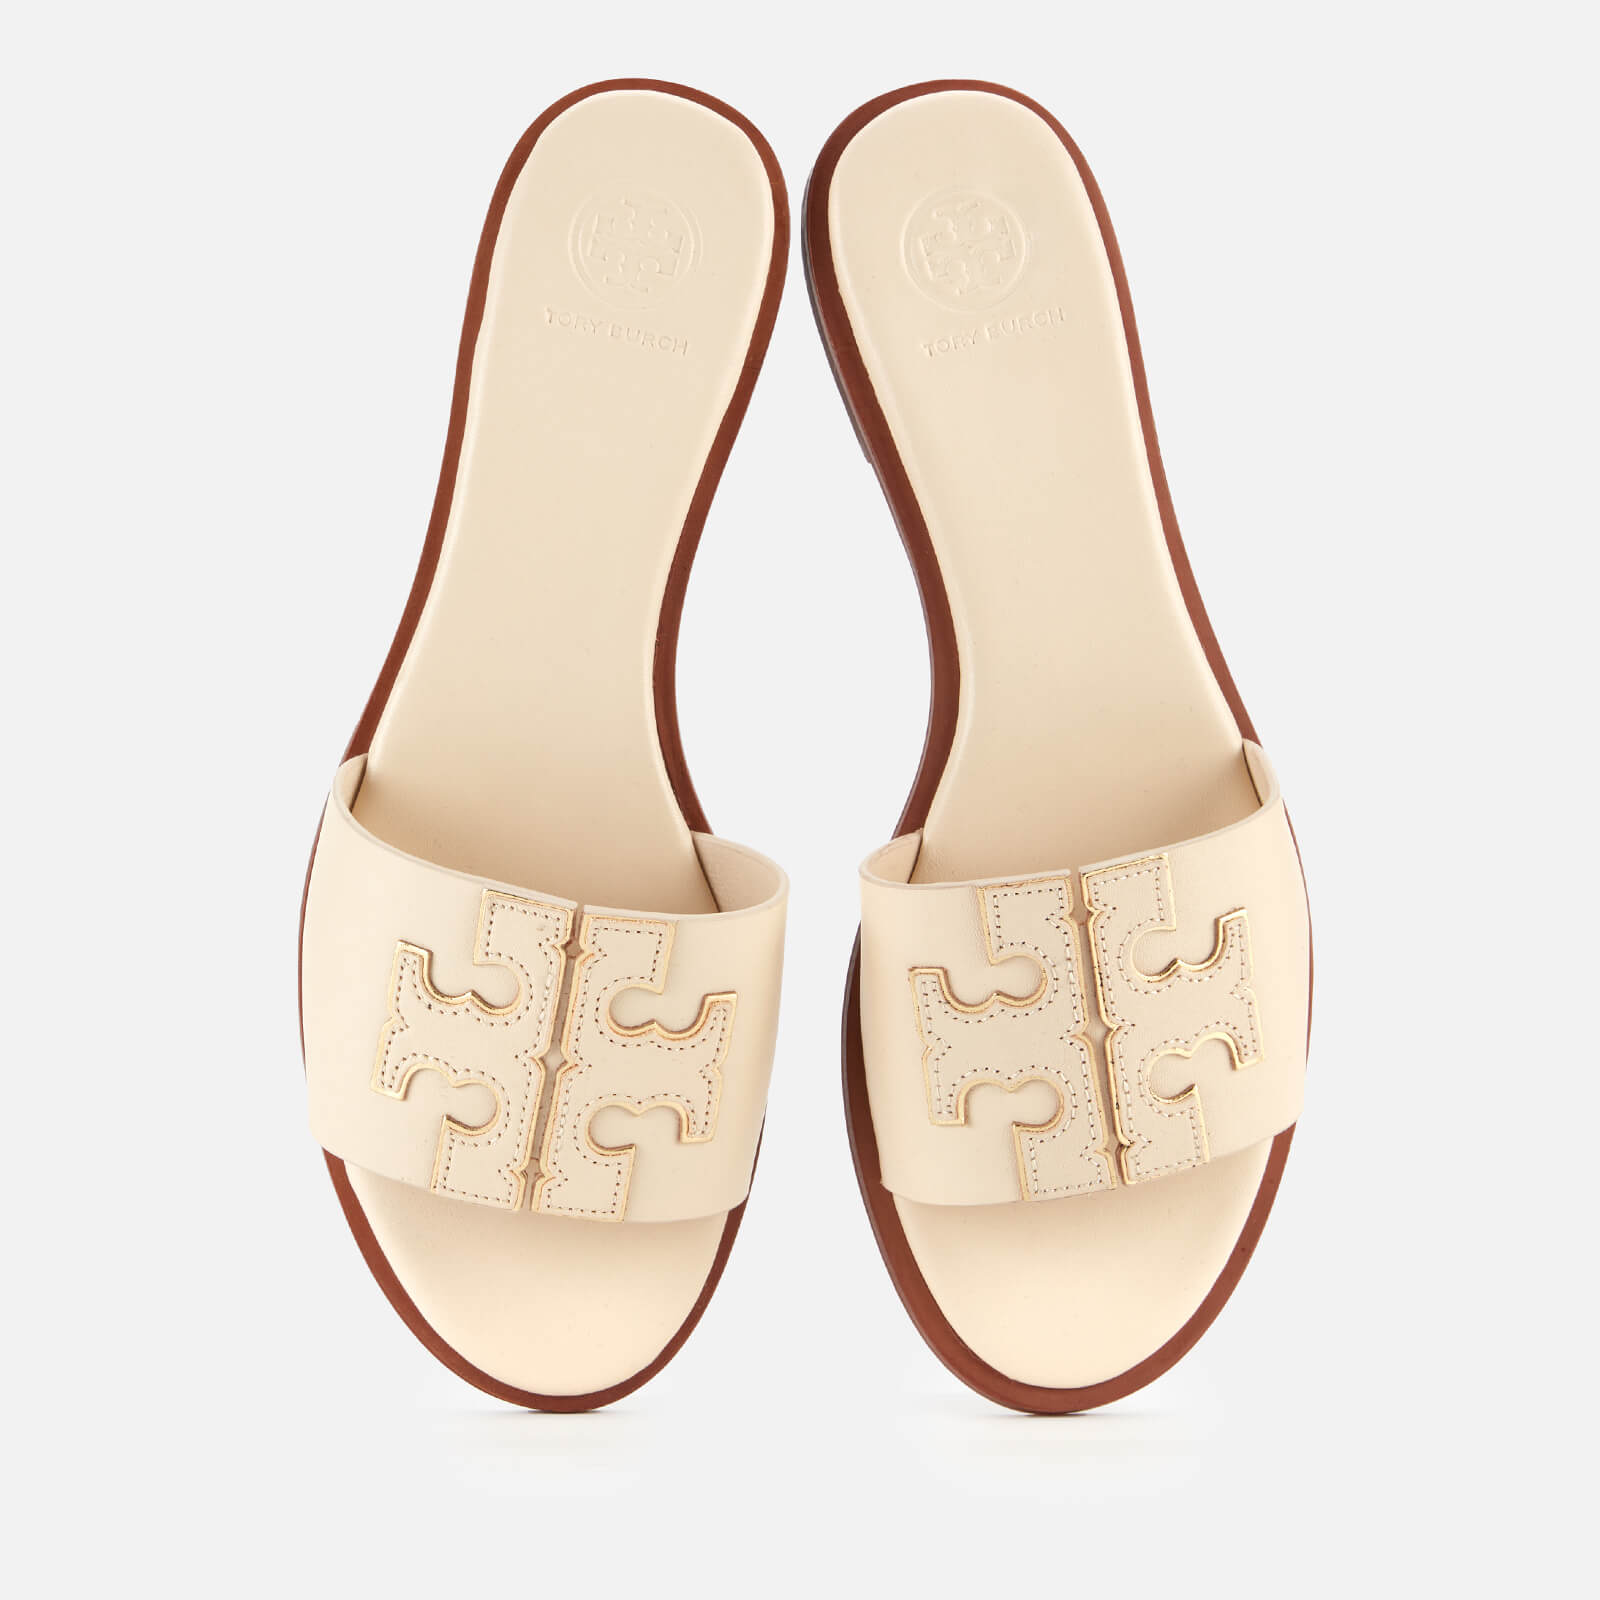 Tory Burch Women's Ines Leather Slide Sandals - New Cream/Gold - 4